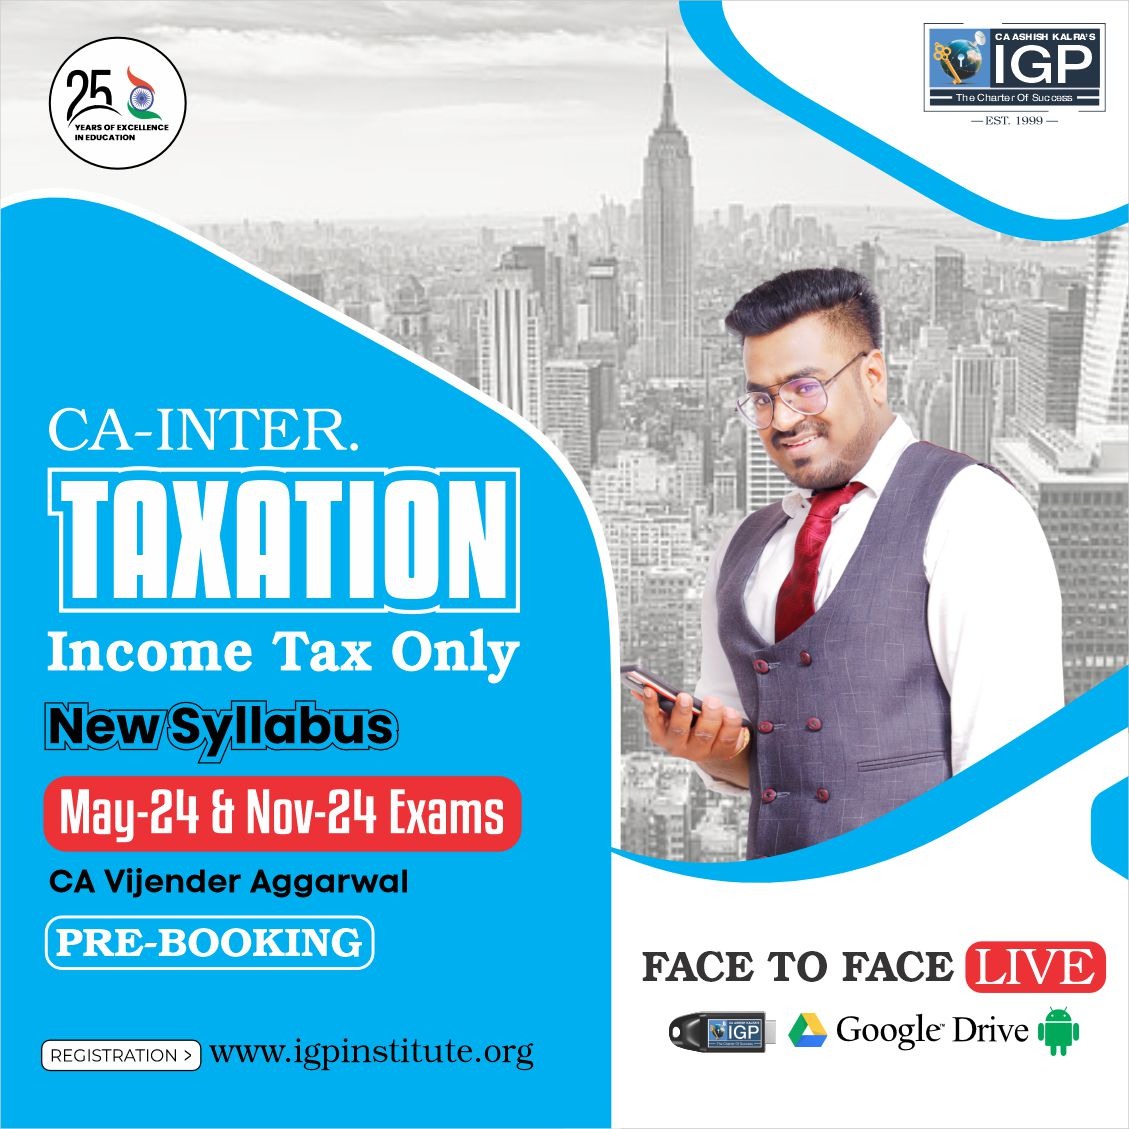 CA Inter Taxation Regular Batch (Income Tax Only) New Syllabus May 24 / Nov 24 Exam Pre-Booking-CA-INTER-Taxation (Income Tax )- CA Vijender Aggarwal